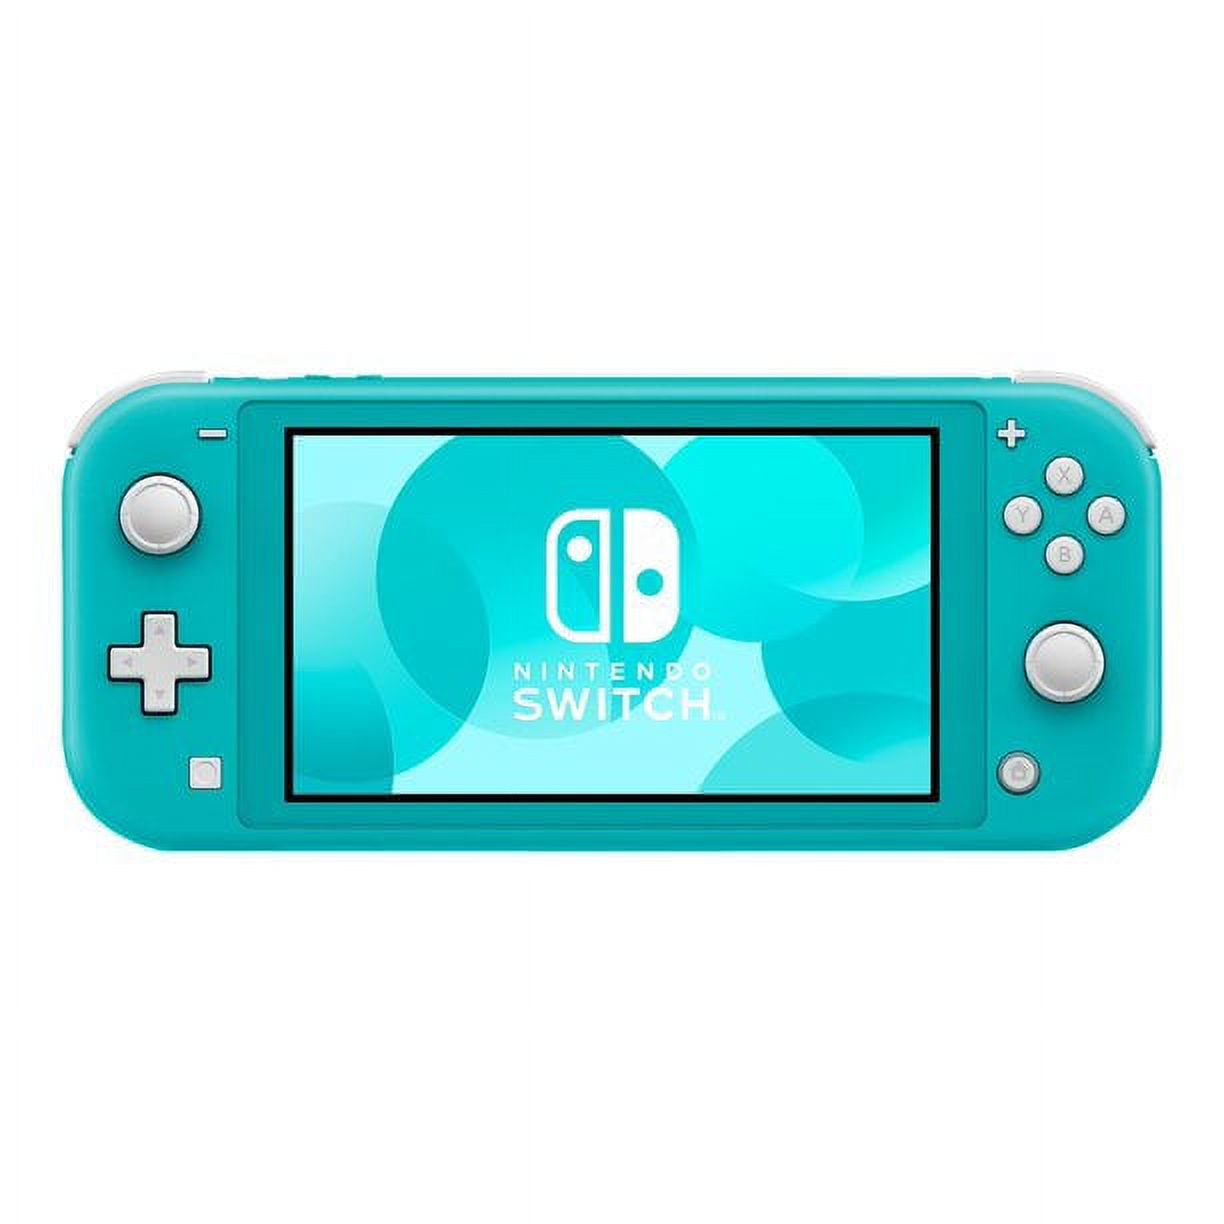 Nintendo Switch Lite - Handheld game console - turquoise - image 1 of 3